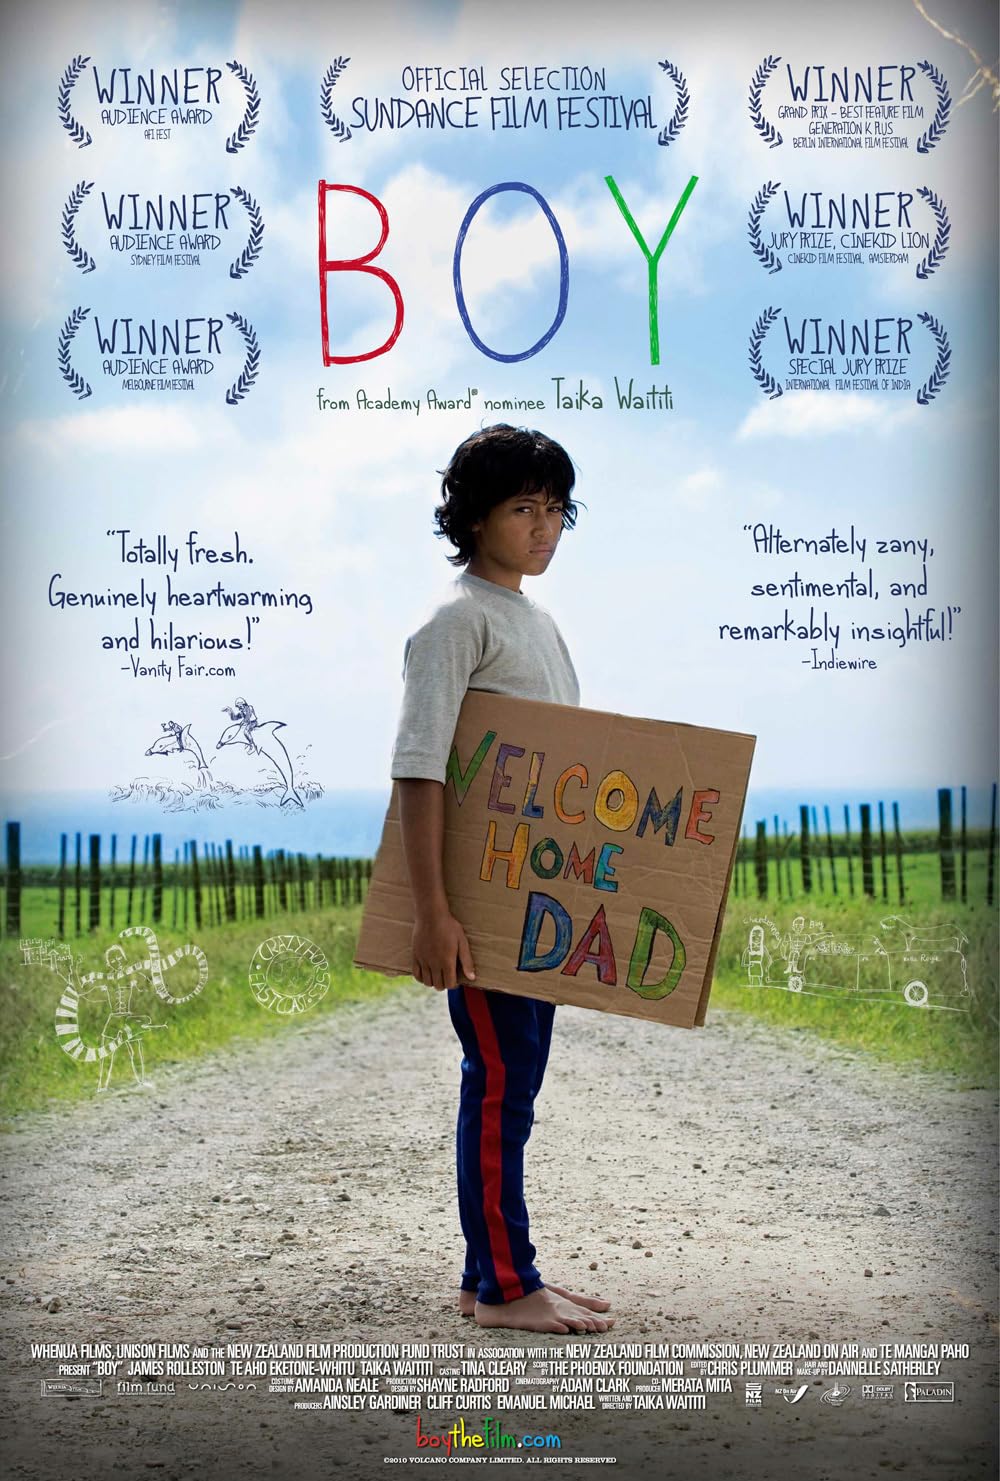 Graphic image of the movie poster for Boy